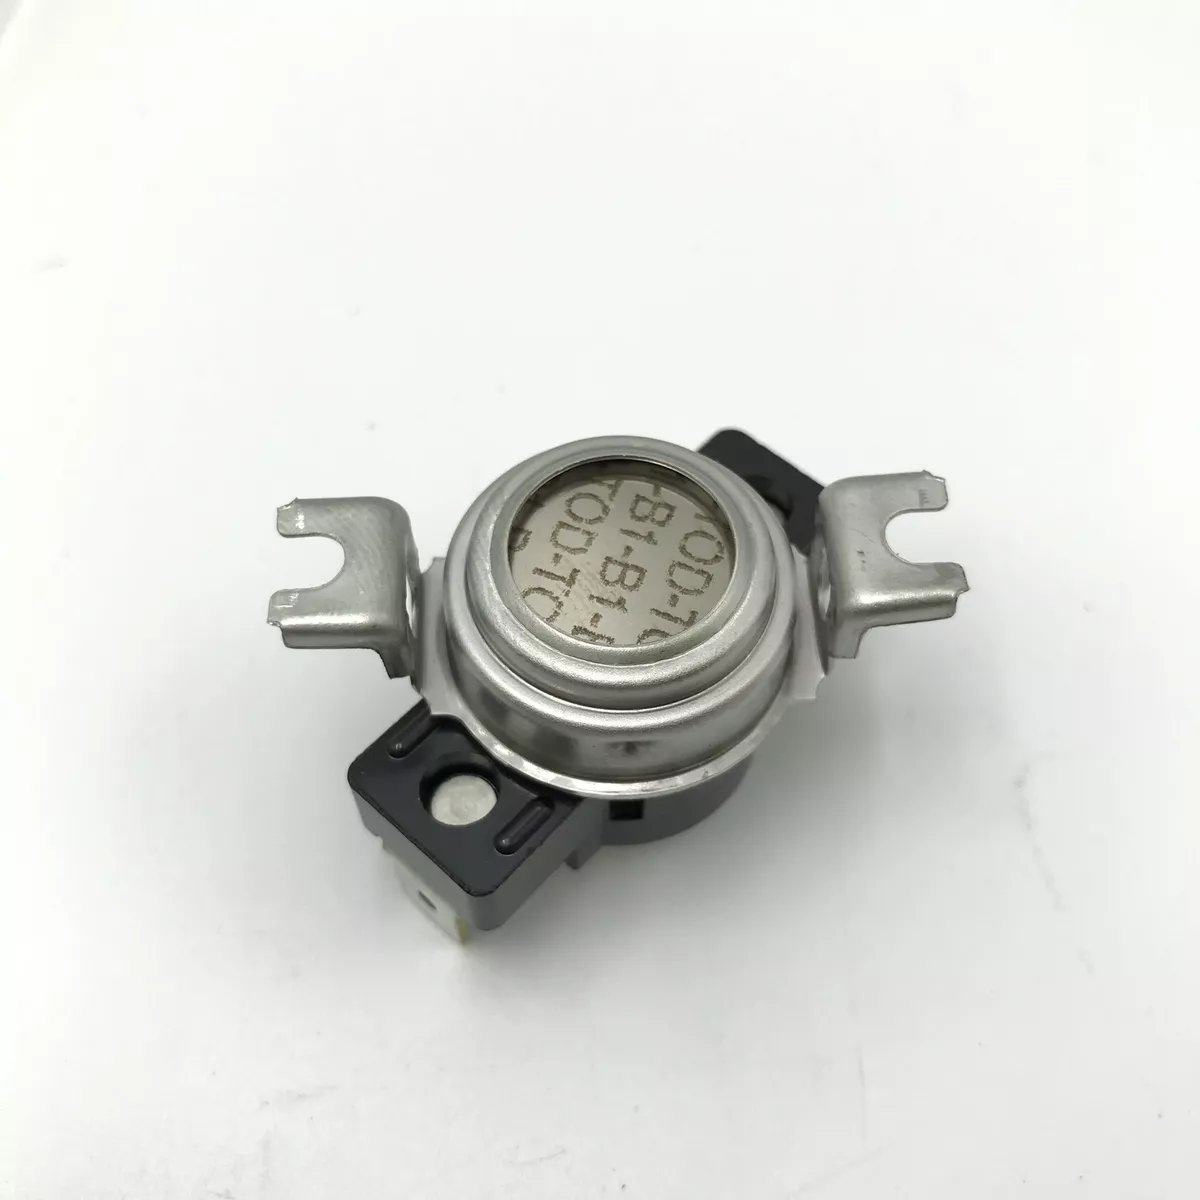 Whirlpool Dryer High Limit Thermostat. Part #305865